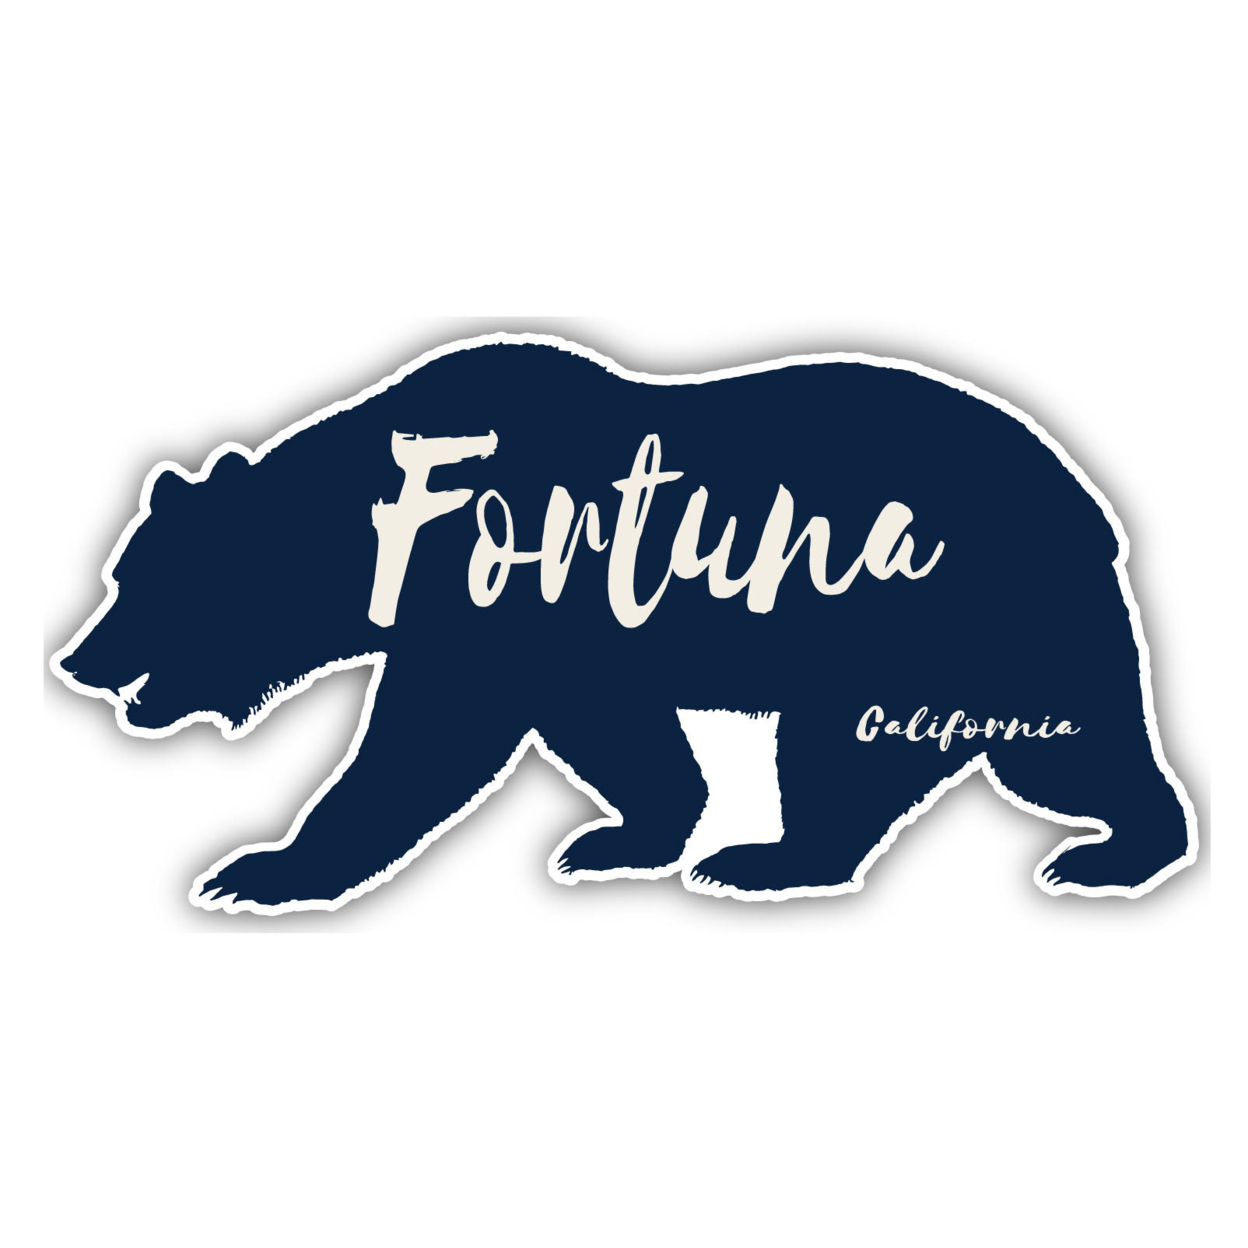 Fortuna California Souvenir Decorative Stickers (Choose Theme And Size) - 4-Pack, 6-Inch, Camp Life